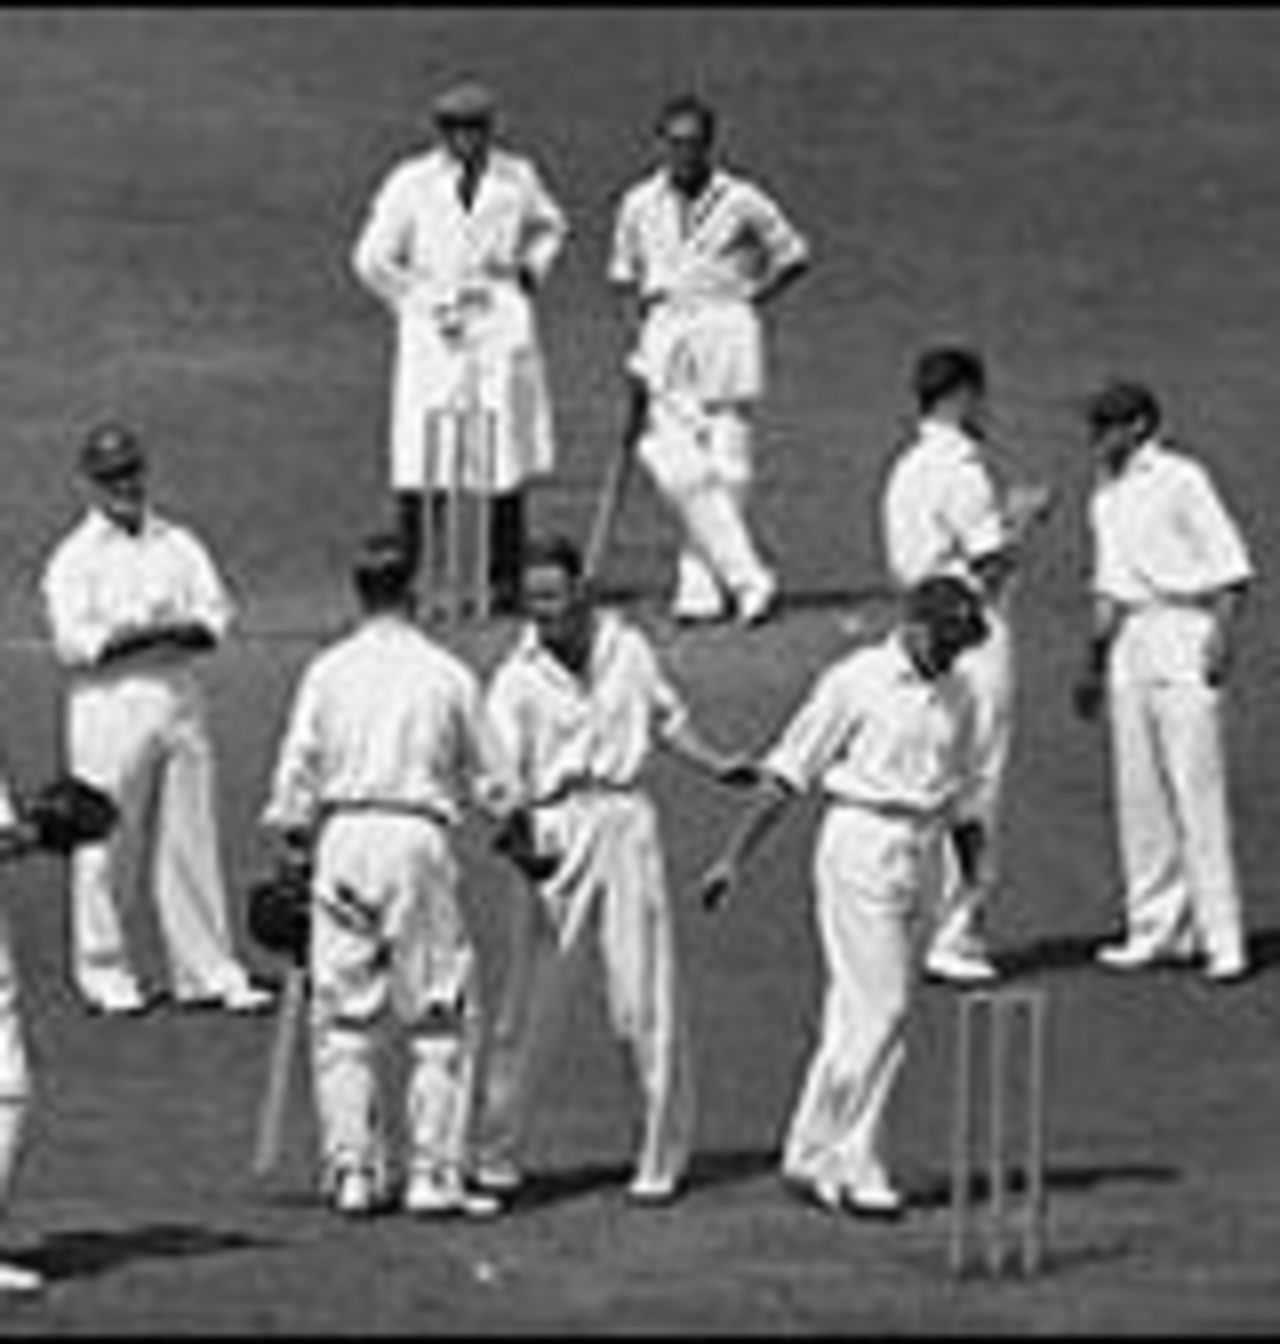 Len Hutton is congratulated after passing Don Bradman's record score, England v Australia, 5th Test, The Oval, August 1938